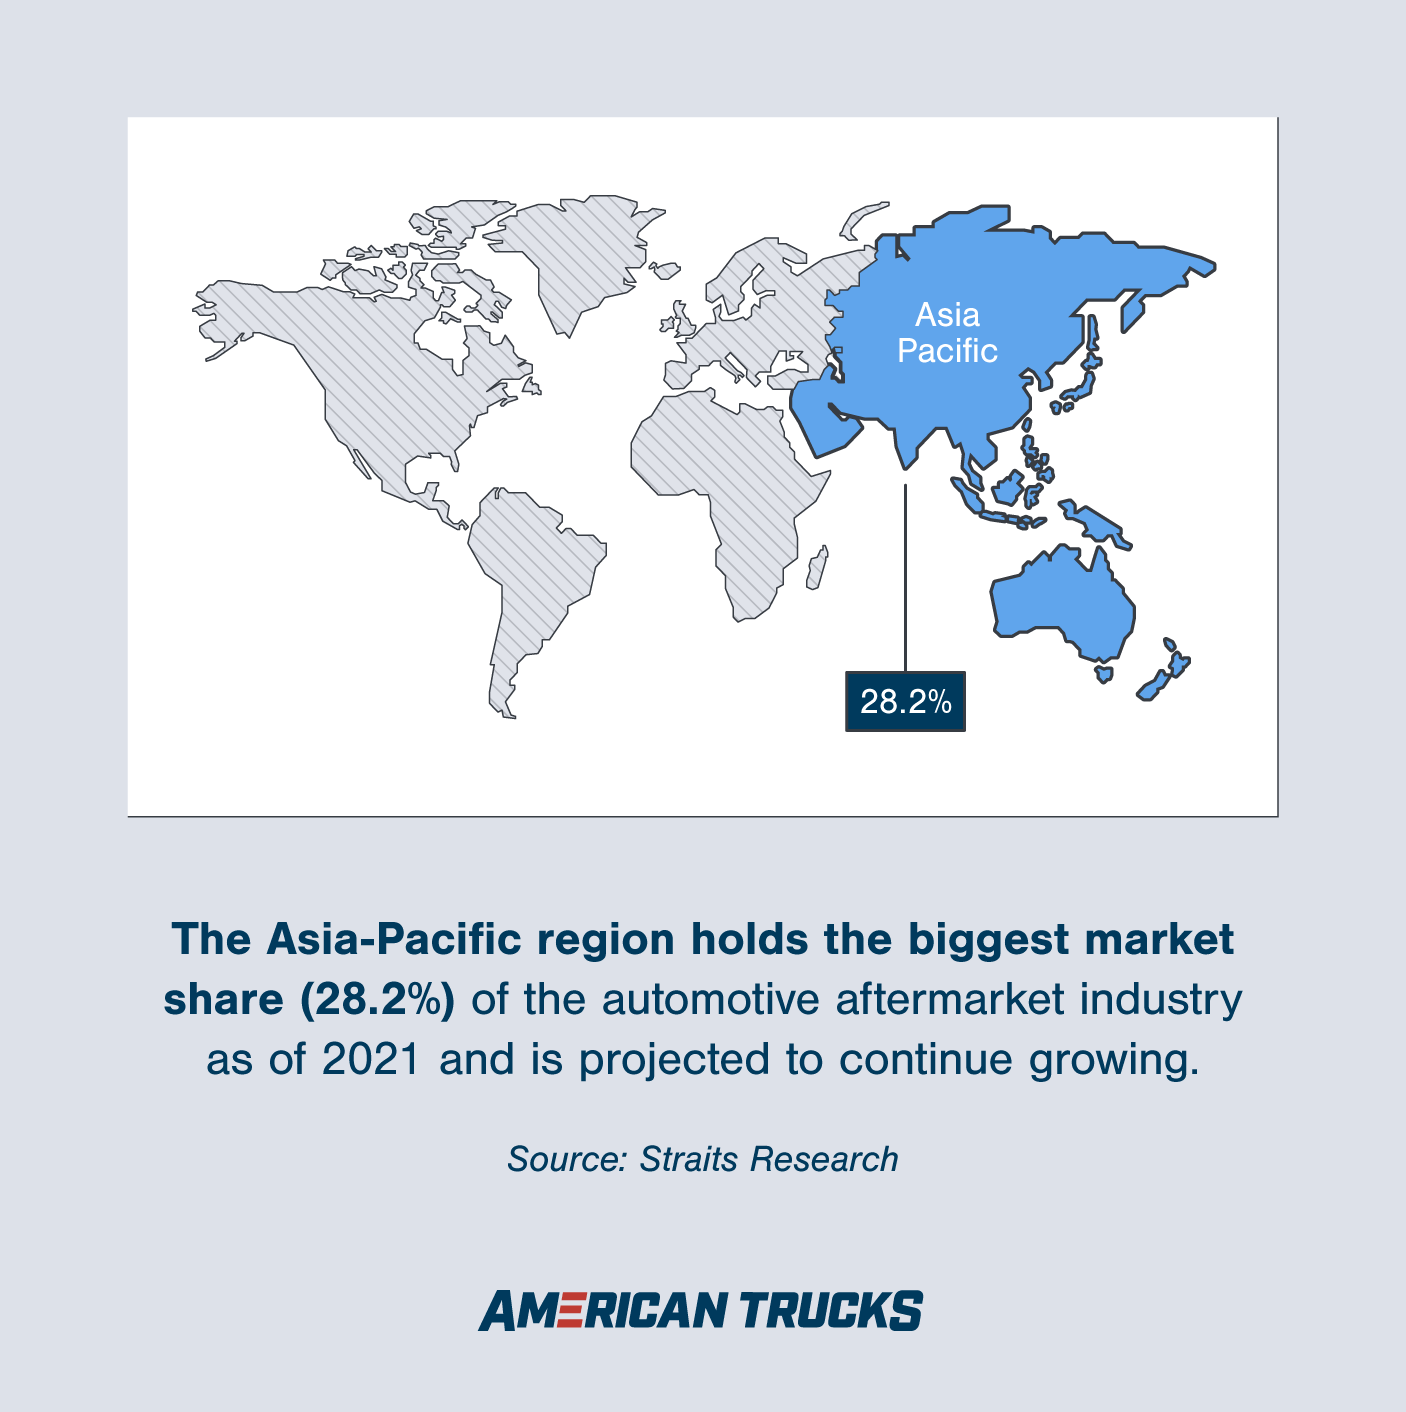 Graphic showing world map with text showing that 28.2% of the automotive aftermarket industry is accounted for by the Asia-Pacific region.